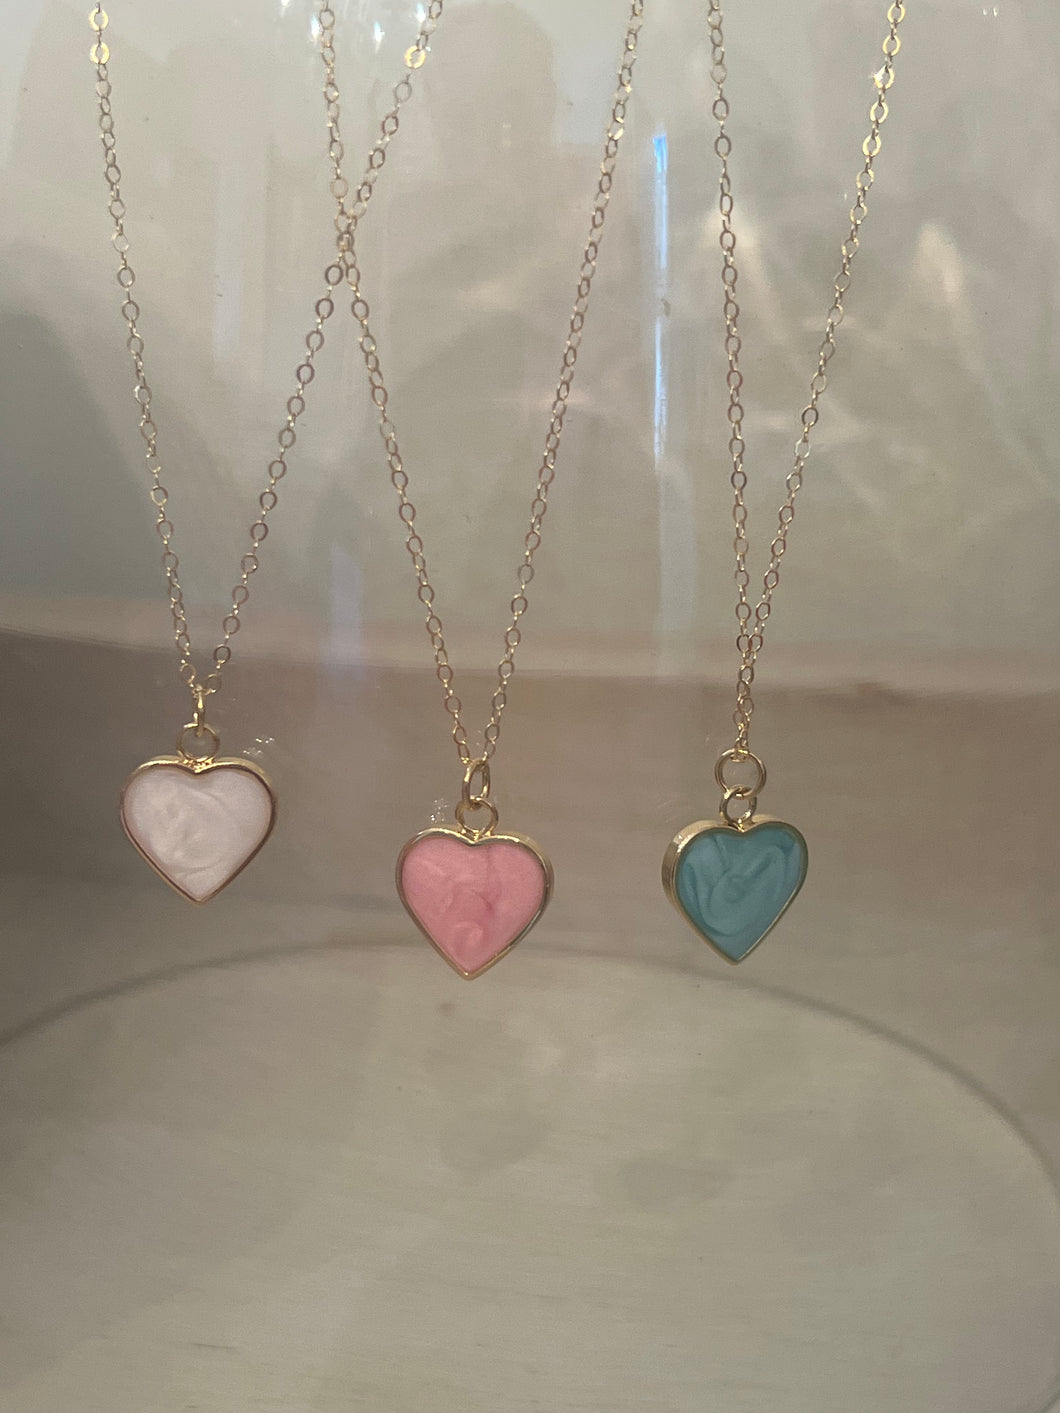 Gold Chain Necklace with Cloud Heart Pendant